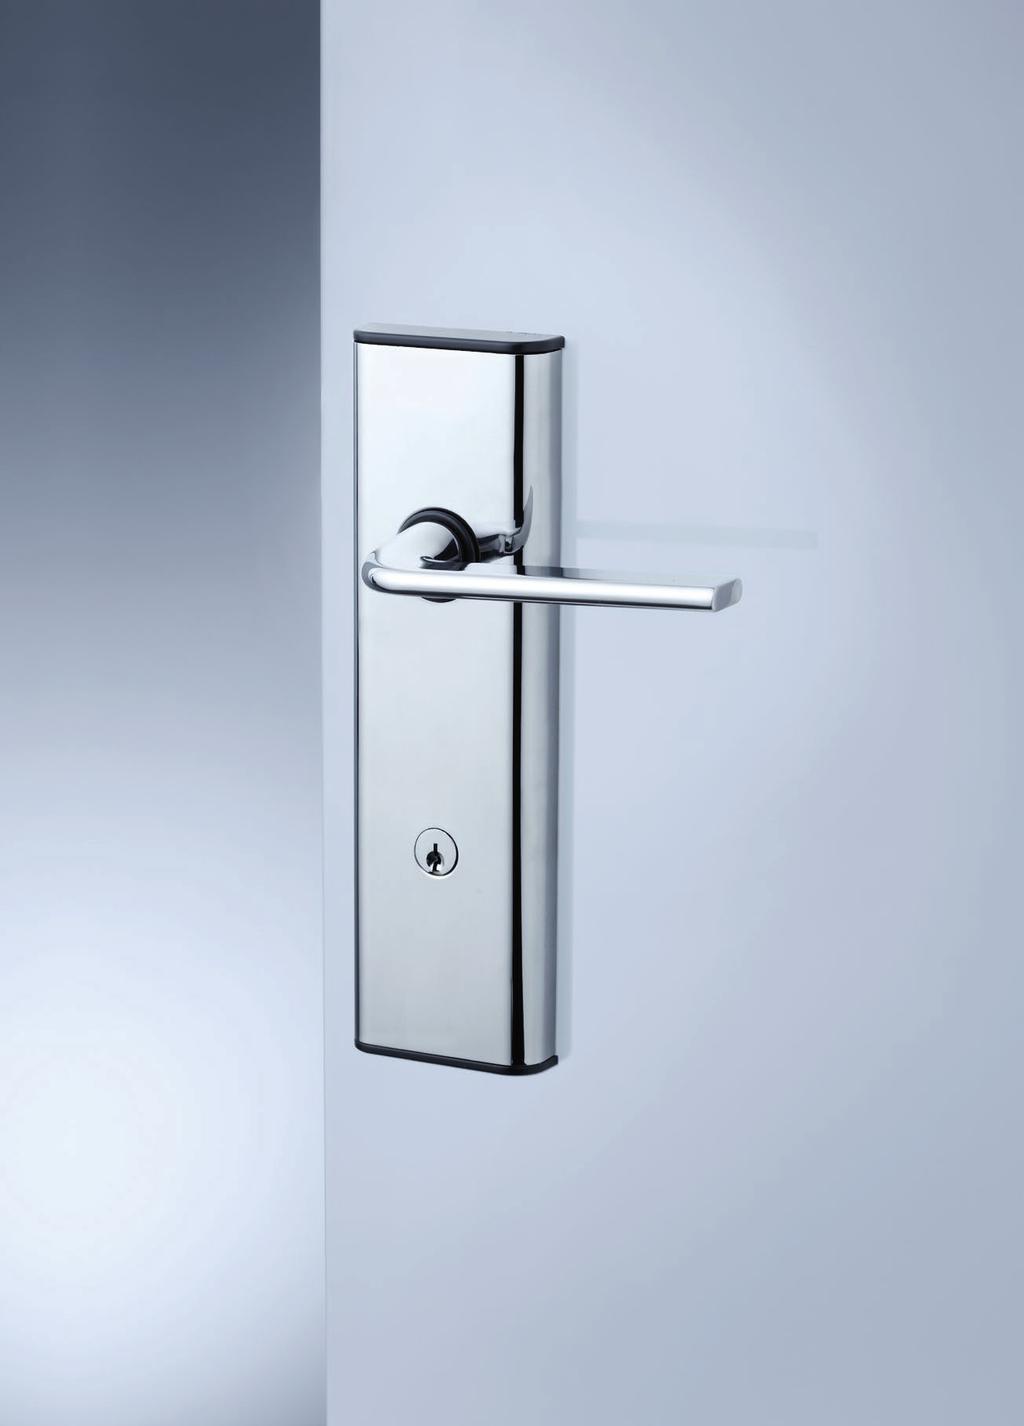 Key in Lever and Key in Knob Locksets Mechanical Entry Locksets We take the worry out of protecting